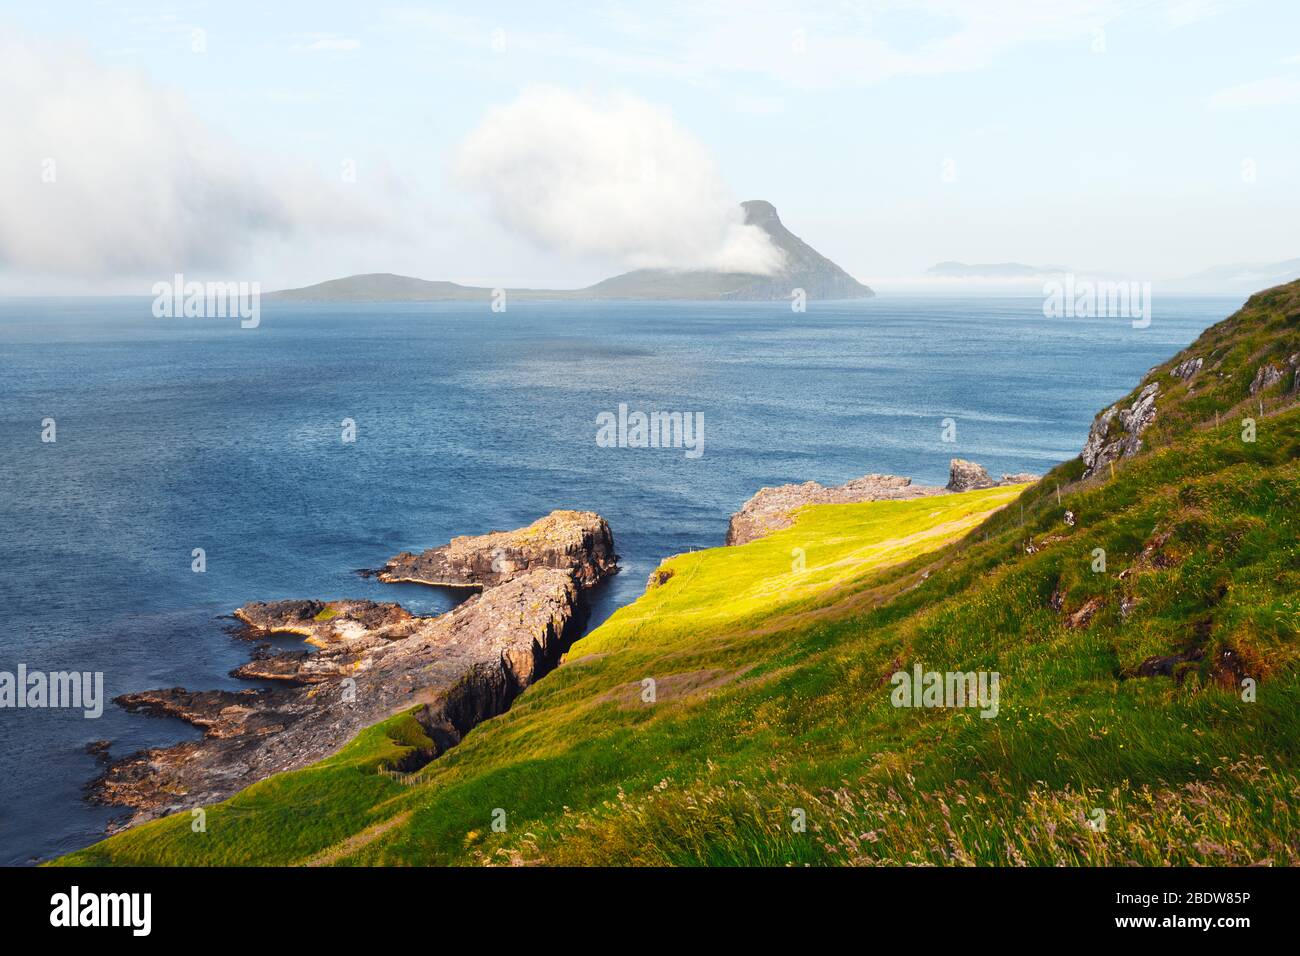 Morning view onto the Faroese island Koltur with spectacular clouds and blue water in a dramatic valley with mountain range. Faroe Islands, Denmark. Landscape photography Stock Photo